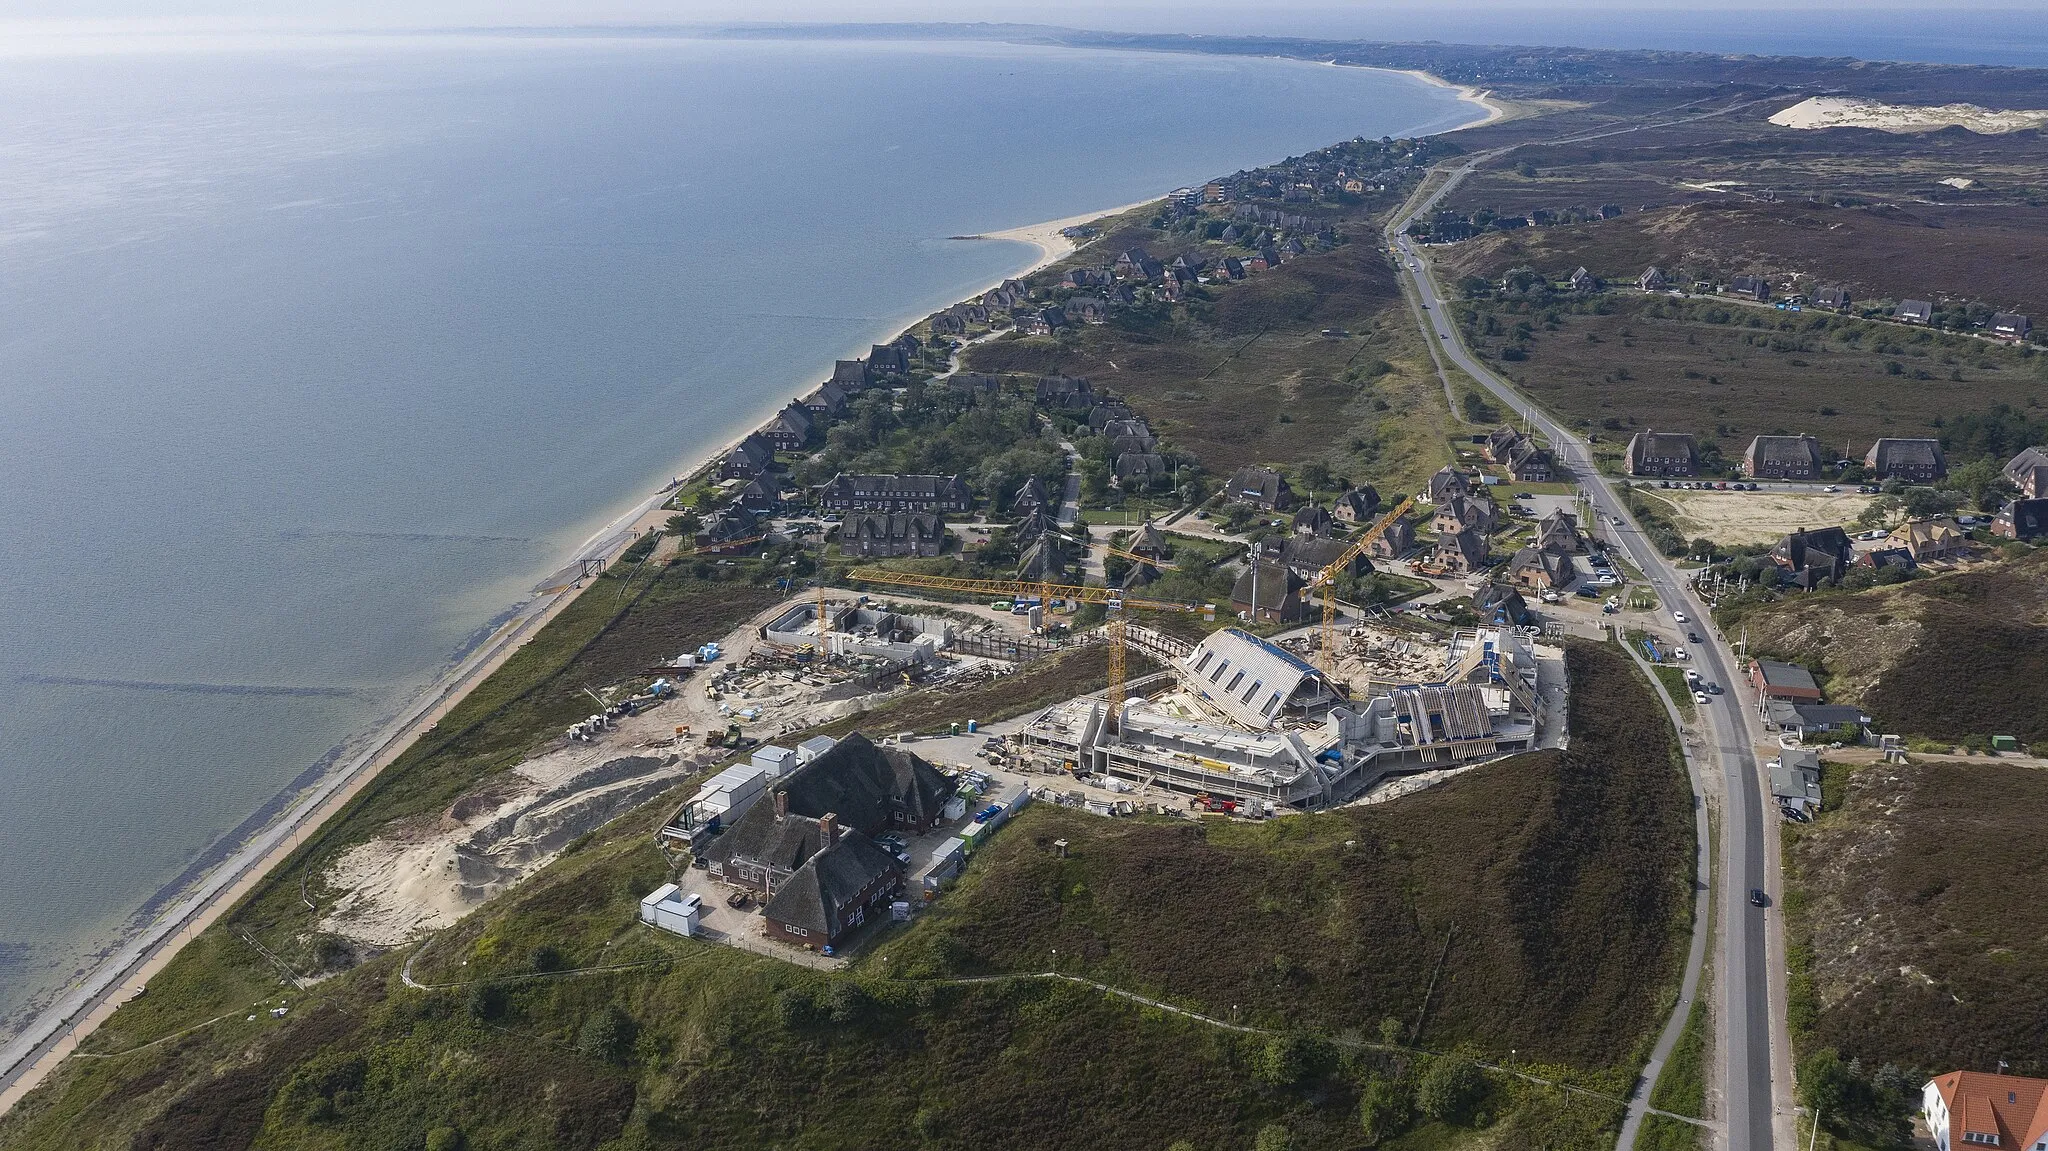 Photo showing: Aerial view of List, Sylt, Schleswig-Holstein, Germany